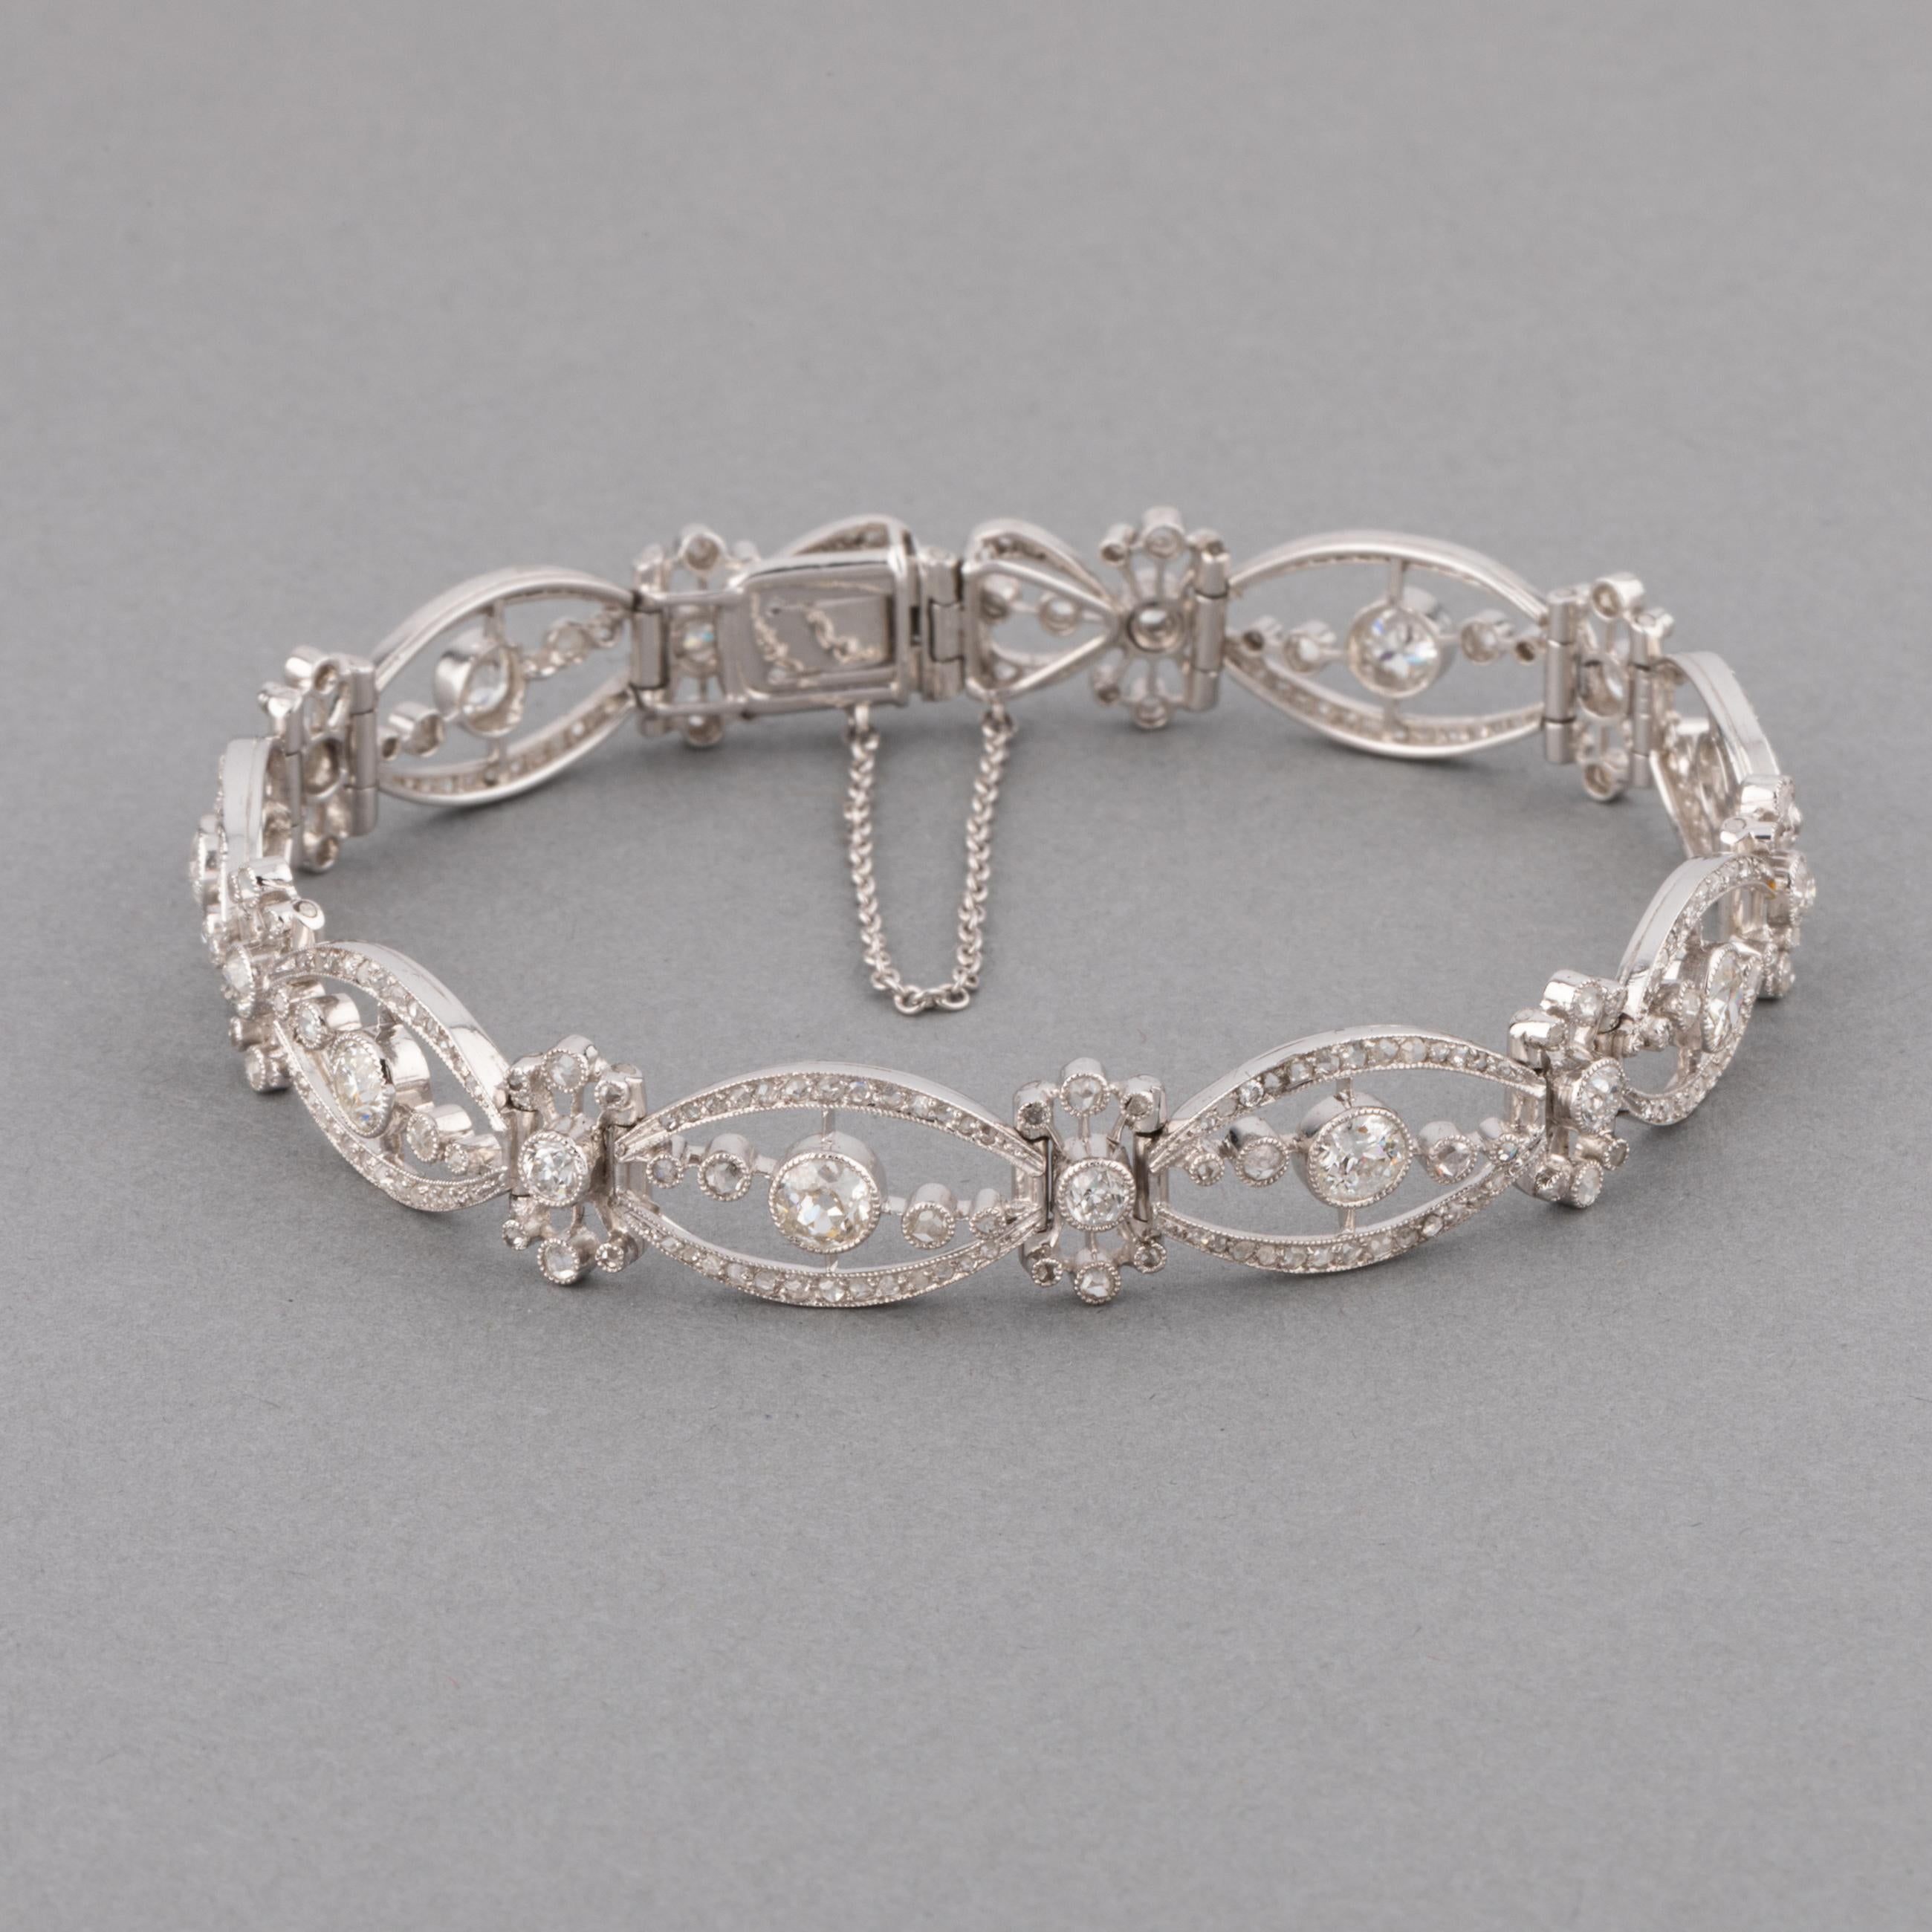 A very beautiful antique bracelet, made in France circa 1910.
Made in white gold 18k and set with old European cut diamonds. The width is 9mm, the length is 17.5 cm. The bigger diamonds weights 0.20 carats each.
Total weight: 17.90 grams

